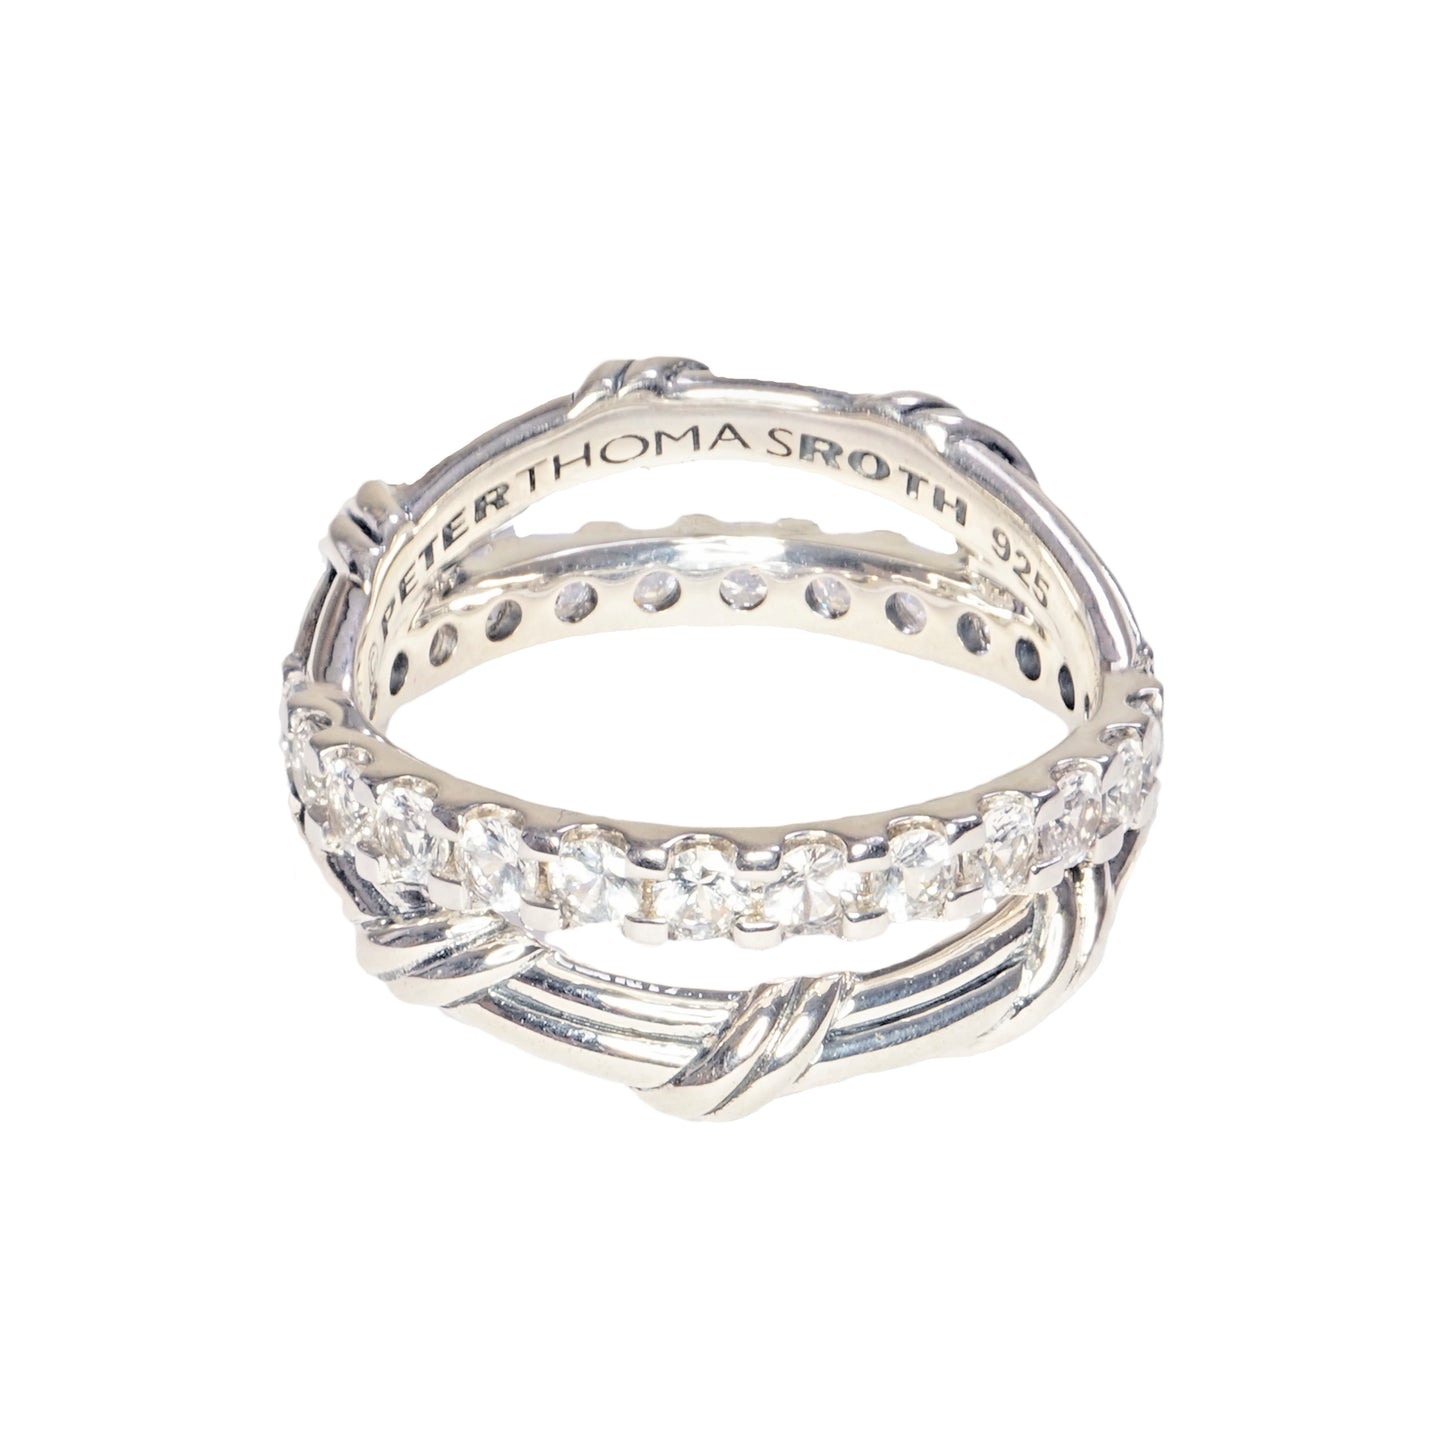 Signature Classic Criss Cross Ring with white topaz in sterling silver